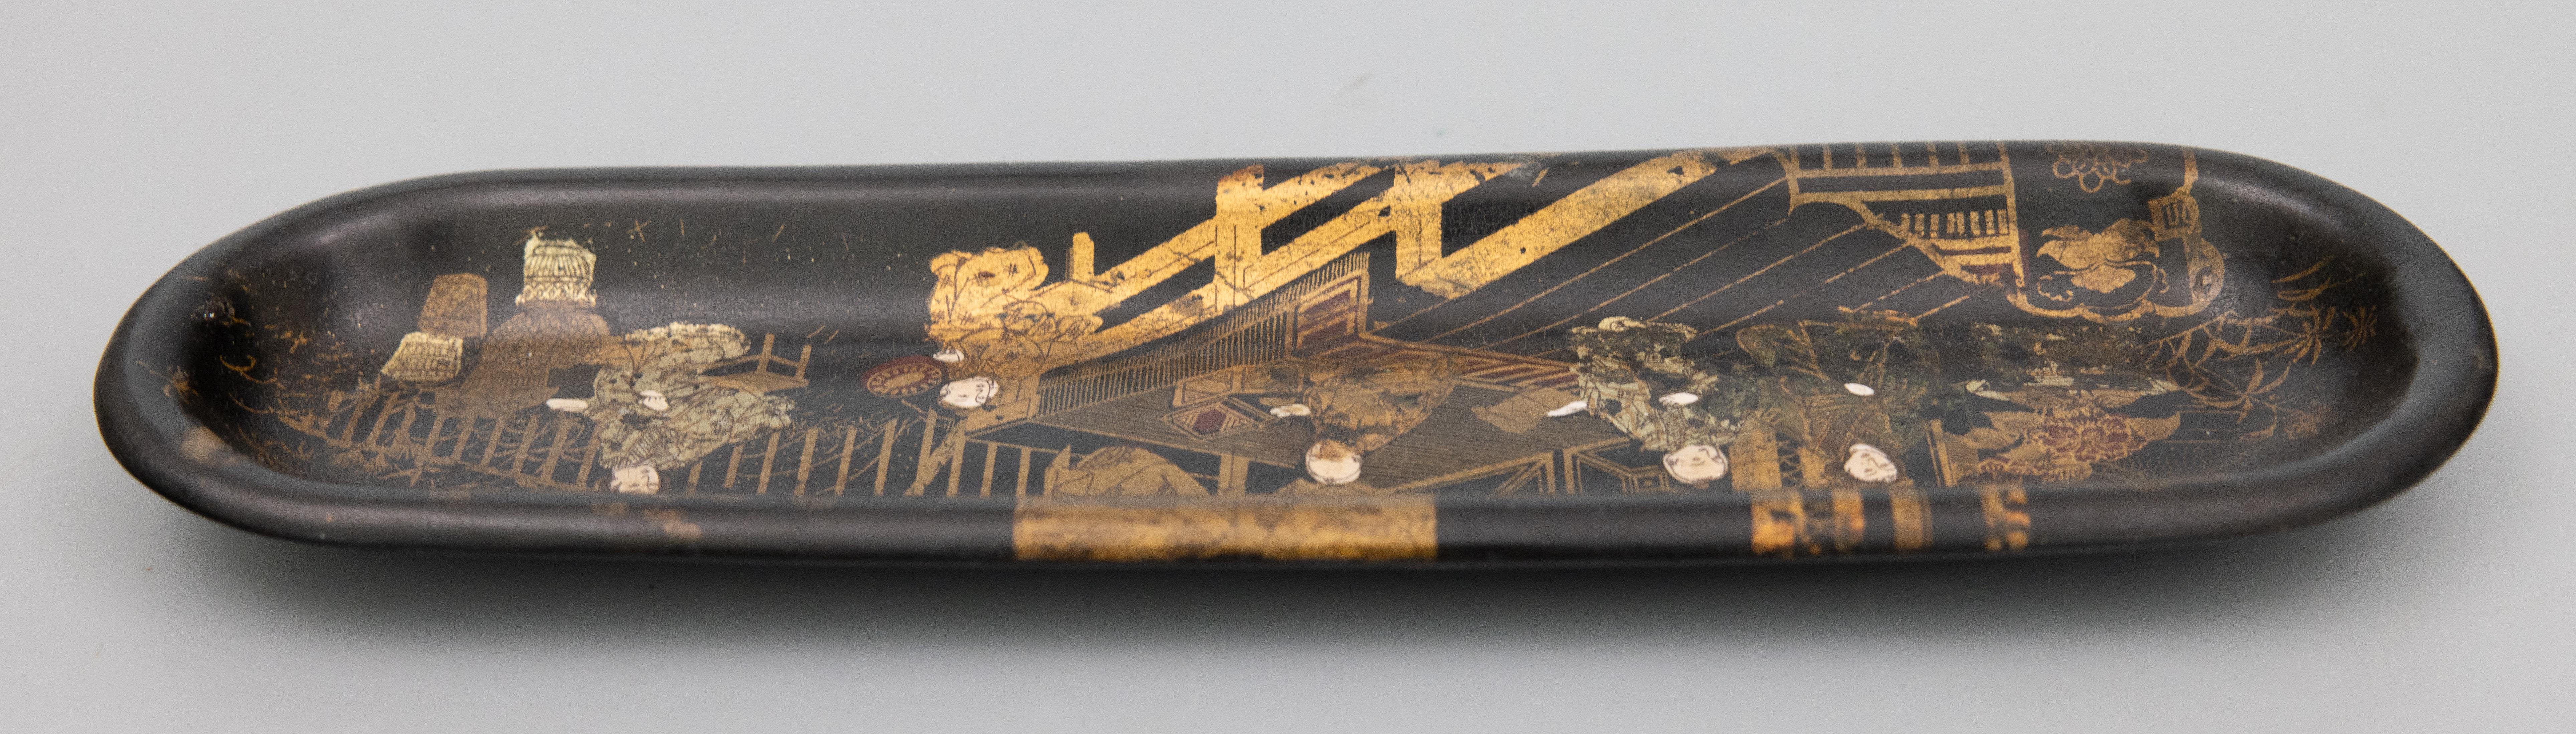 Antique 19th Century English Chinoiserie Papier Mache Pen Tray In Good Condition For Sale In Pearland, TX